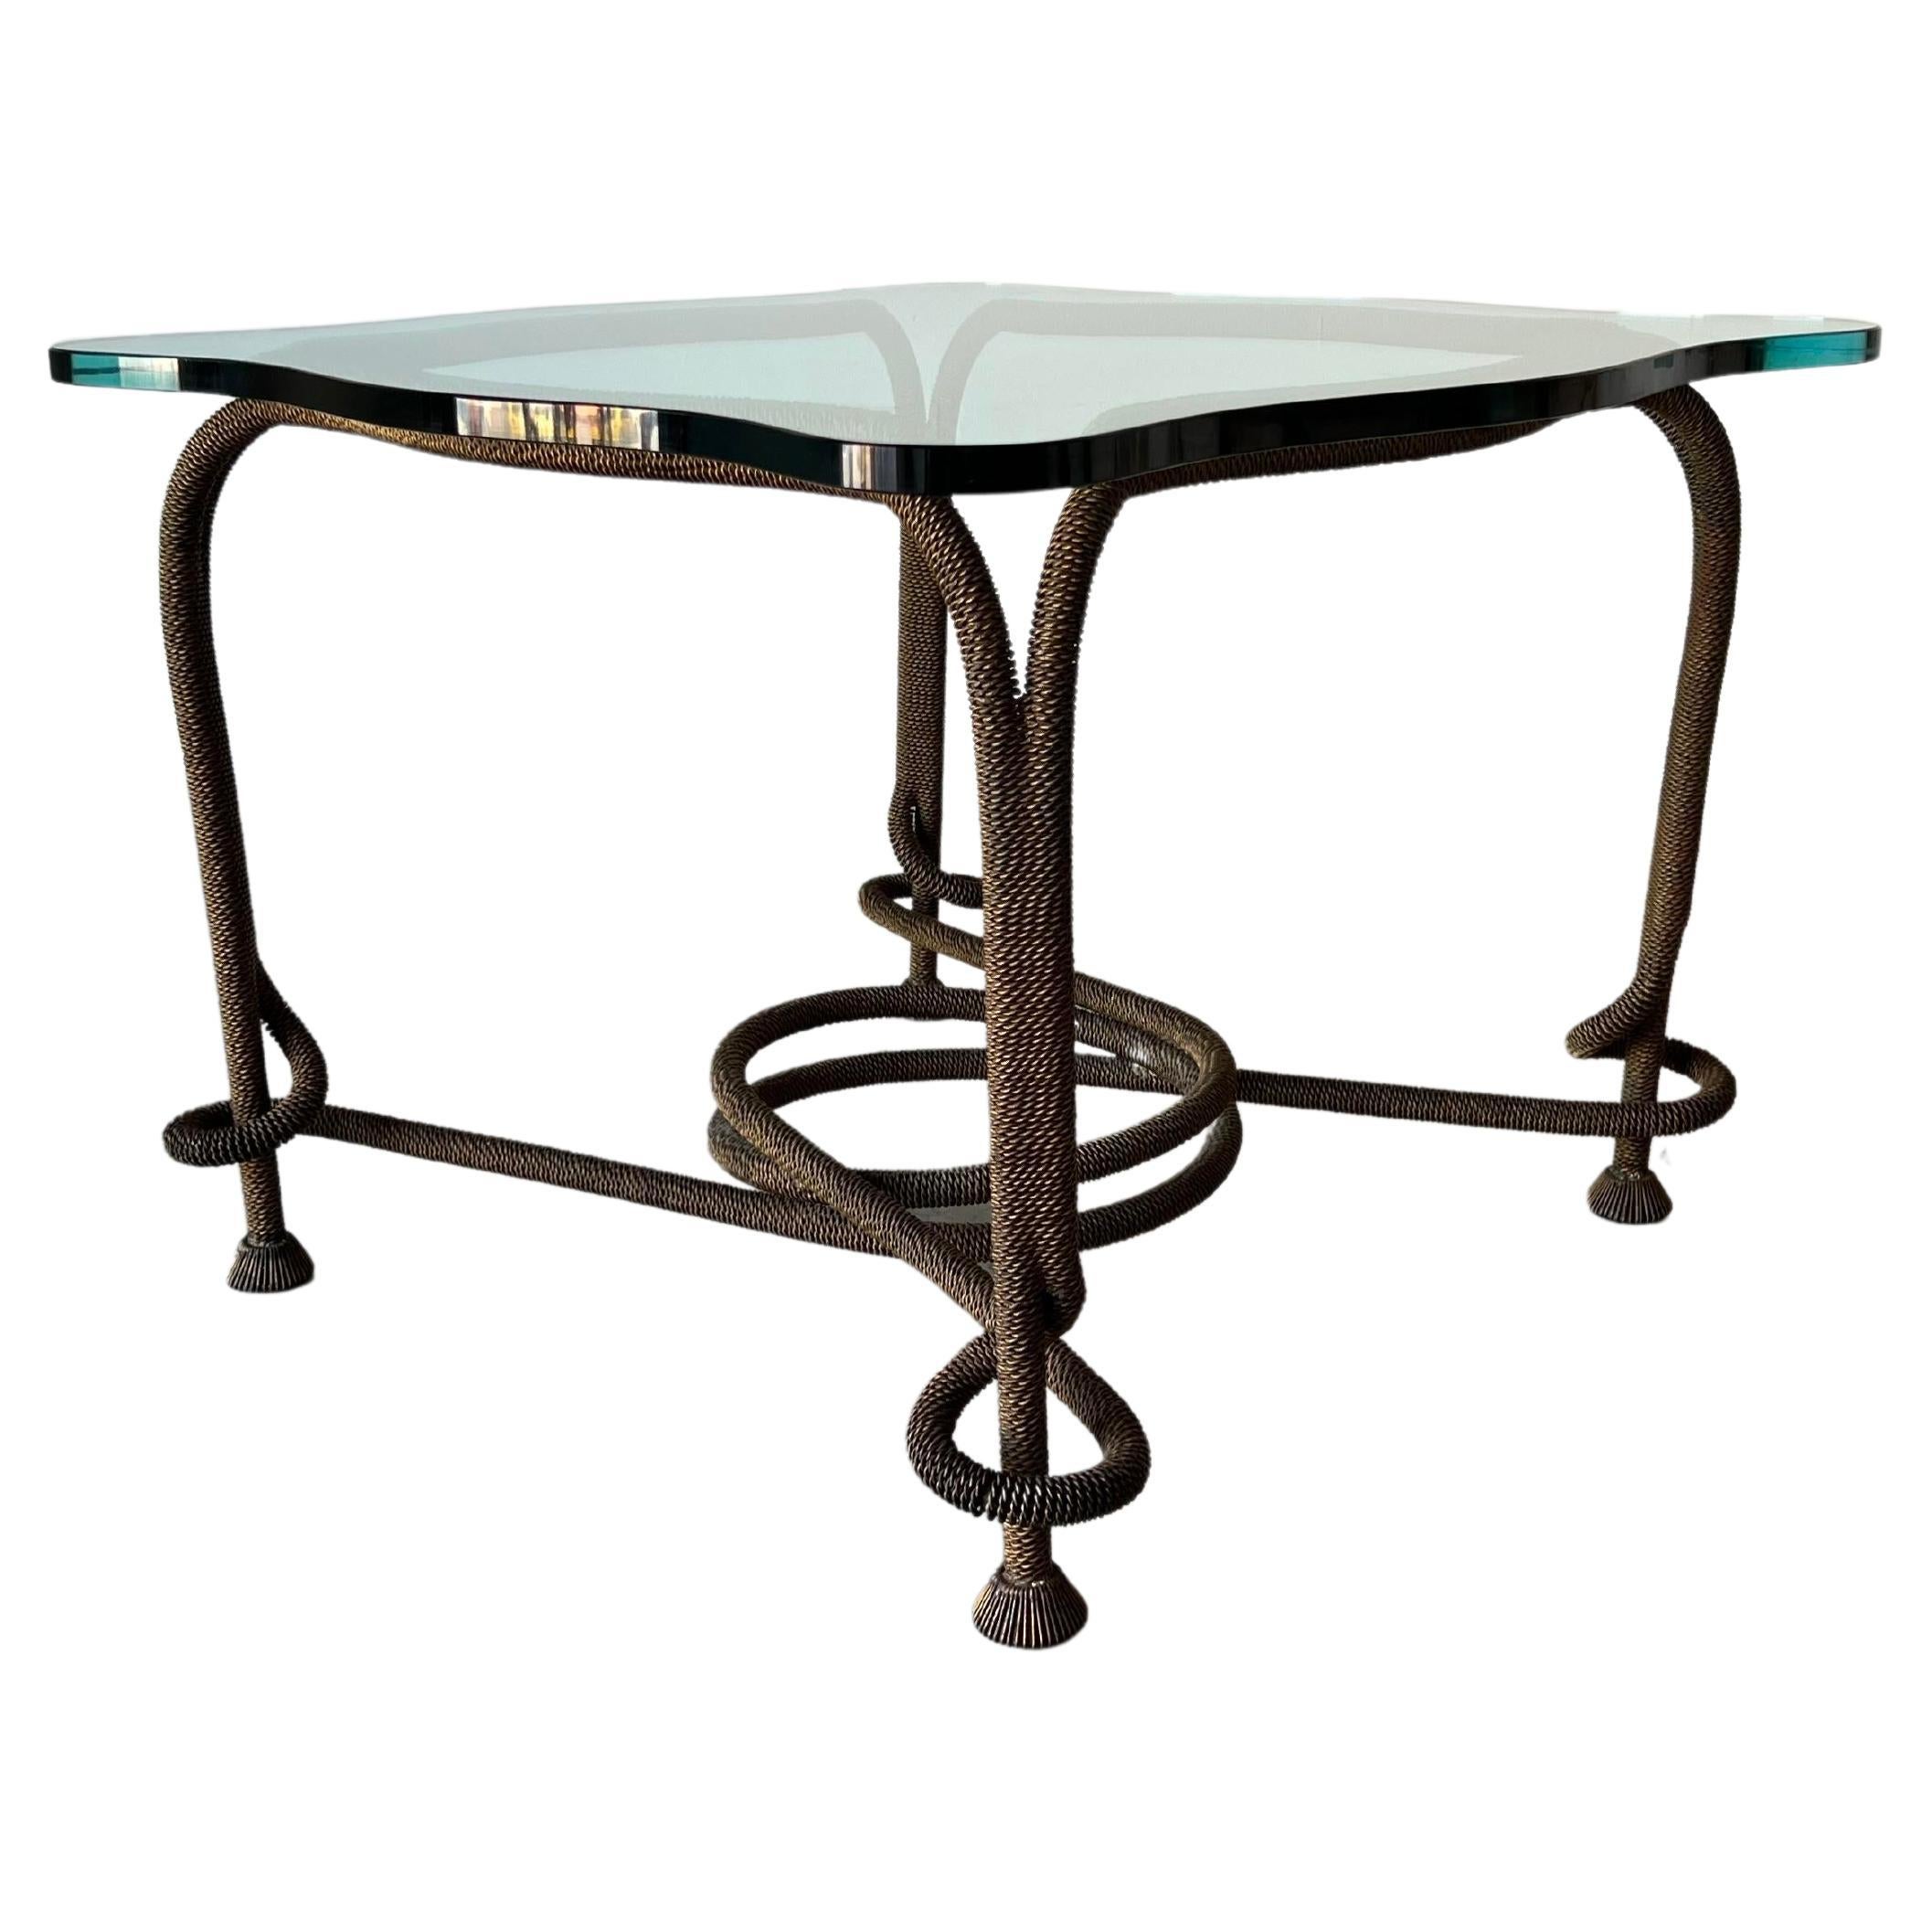 Rare Emilio Rey Gilded Metal & Scalloped Glass Top Side Table, Spain 70's For Sale